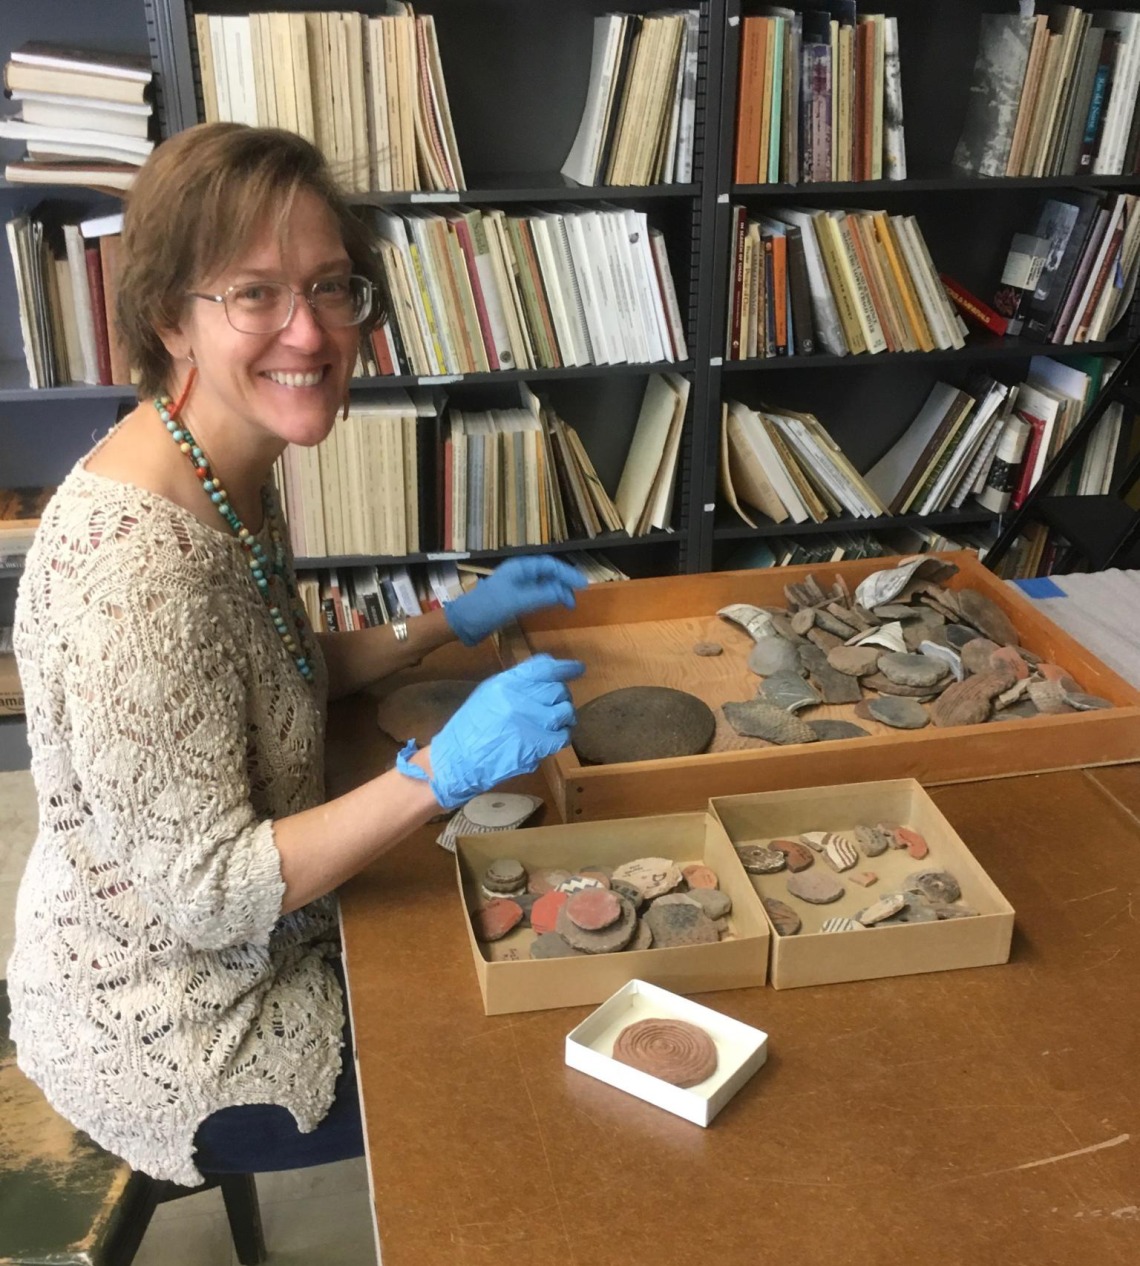 This is an image of Dr. Suzanne L. Eckert, head of collections. She is sorting pottery sherds.